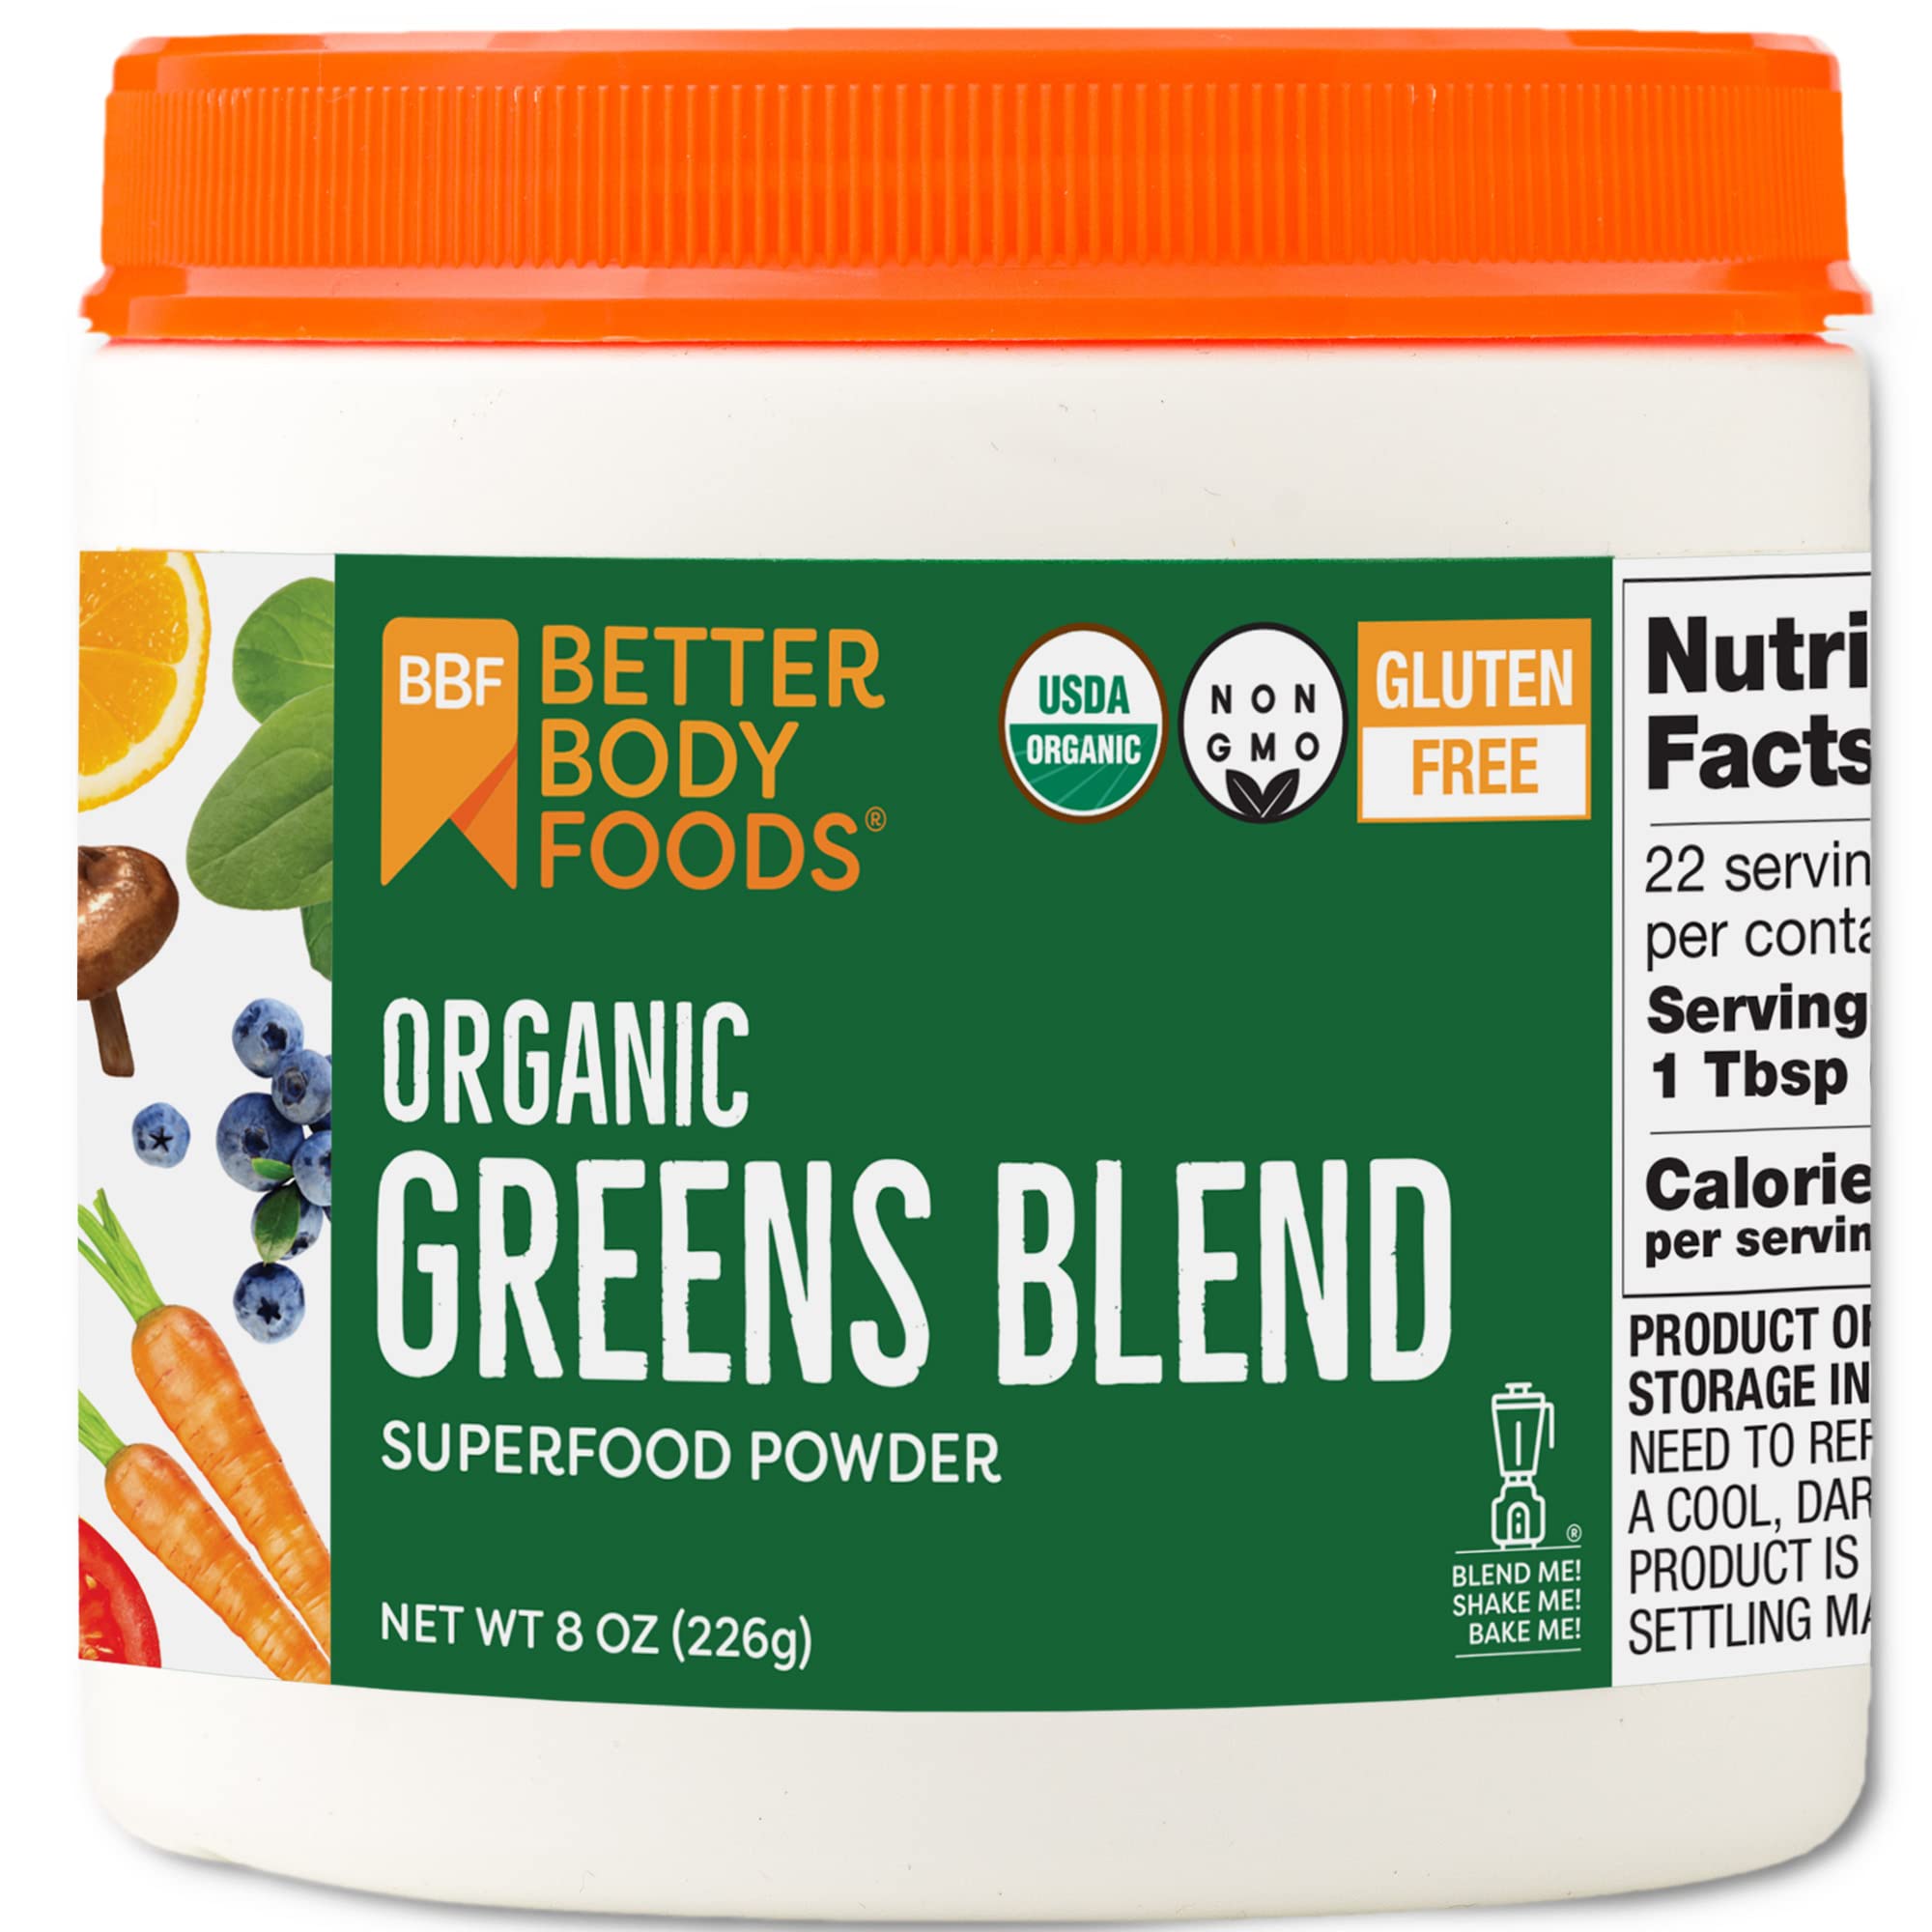 BetterBody Foods Organic Greens Blend (8 oz) | Superfood Powder for Nutrition & Smoothie Booster~$7.10 @ Amazon~Free Prime Shipping!